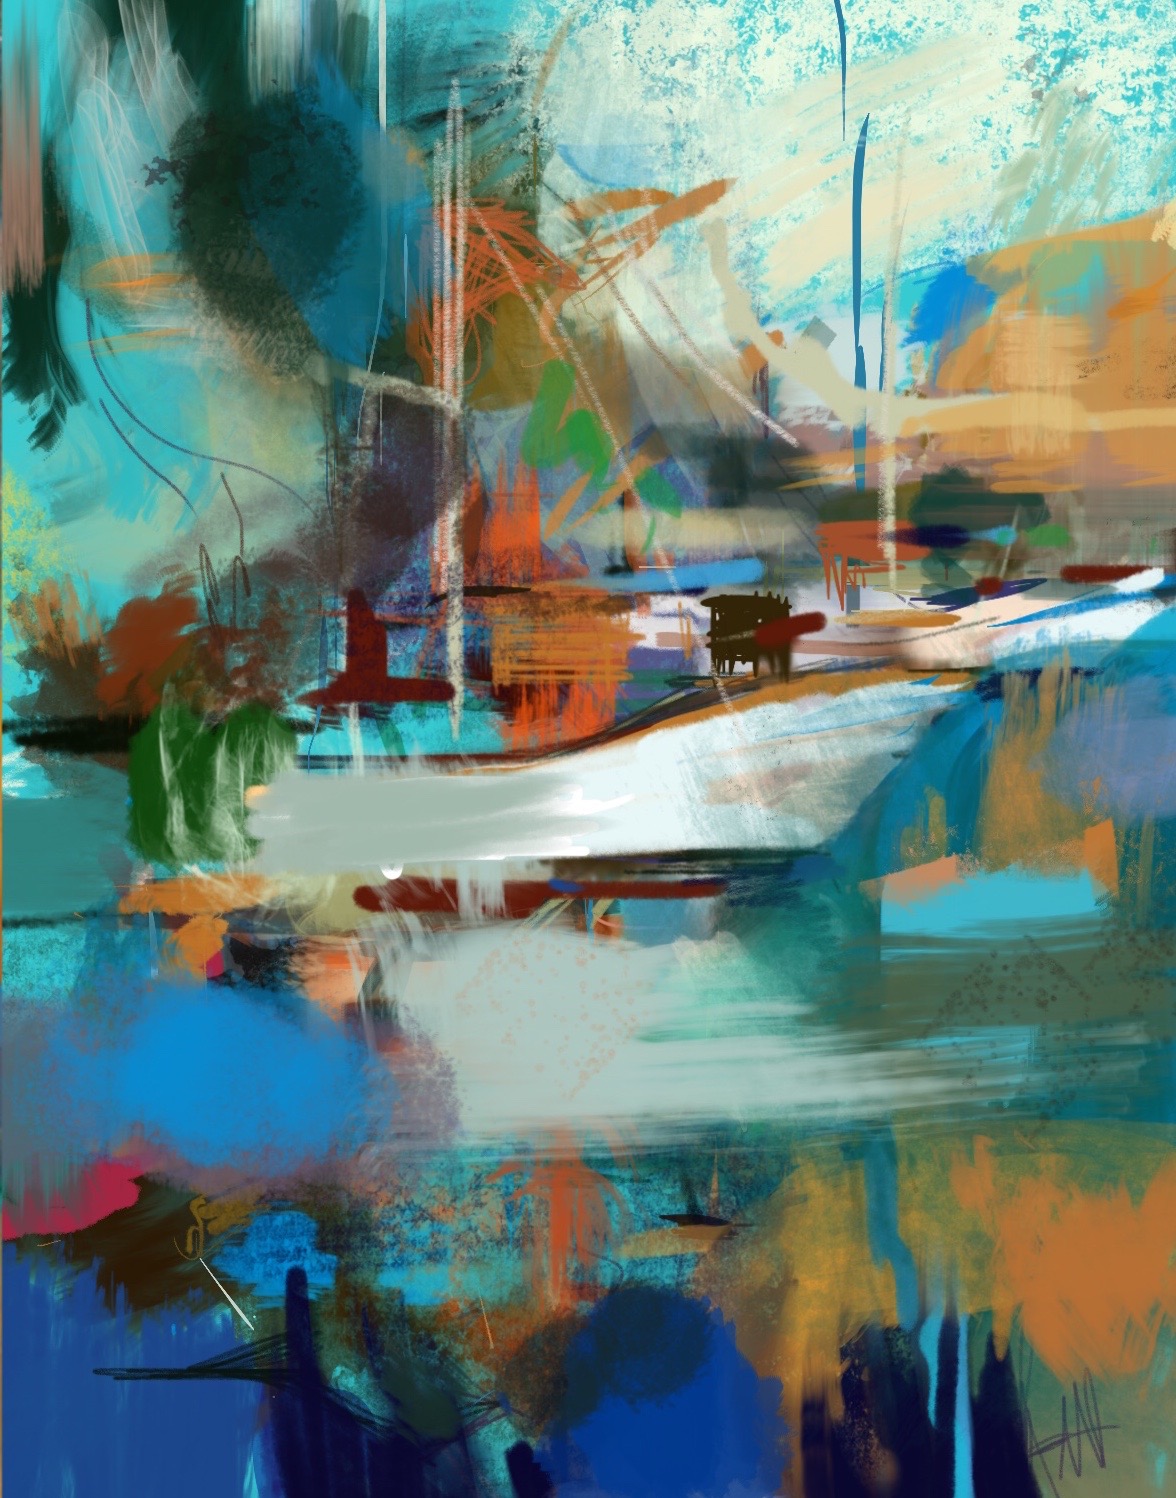 Abstract Boats, iPad composition